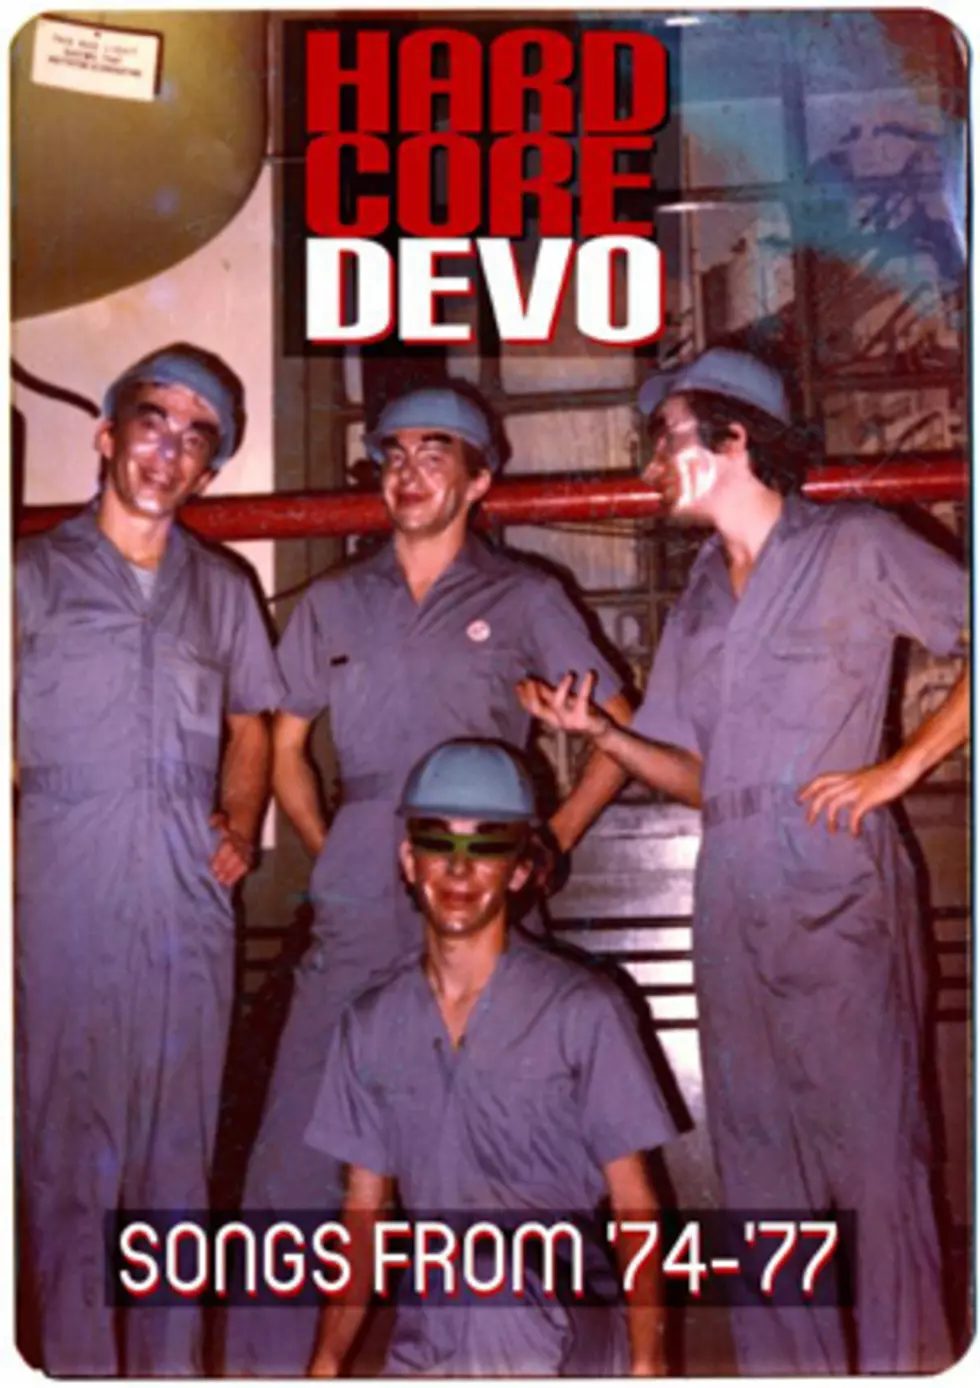 Devo Announce 2014 Tour Dates and Record Store Day Releases